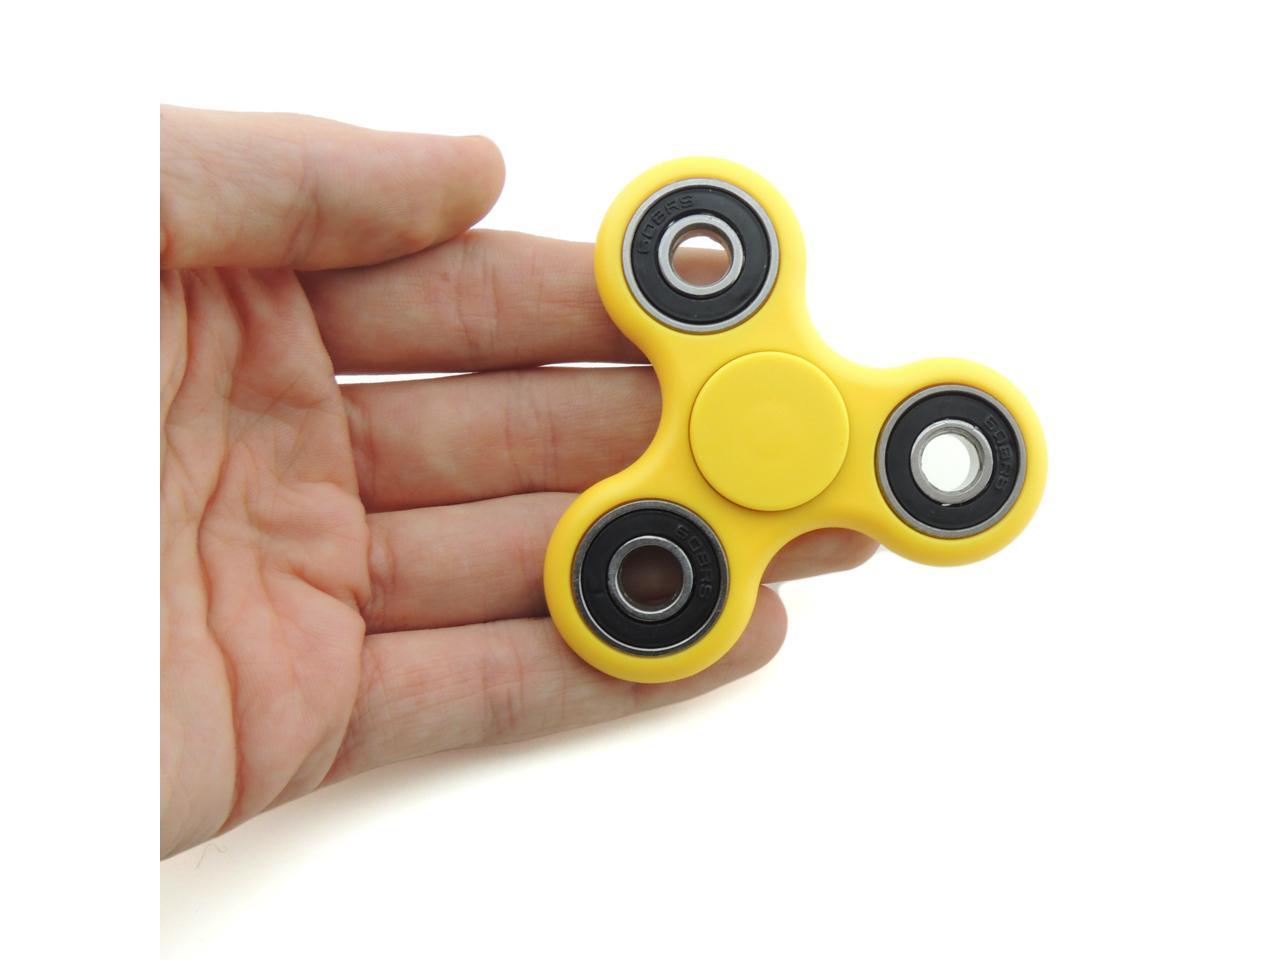 2019Tri Hand Spinner Stress Relief Mini Fidget Desk Toy EDC Gifts AUTISM ADHD US 